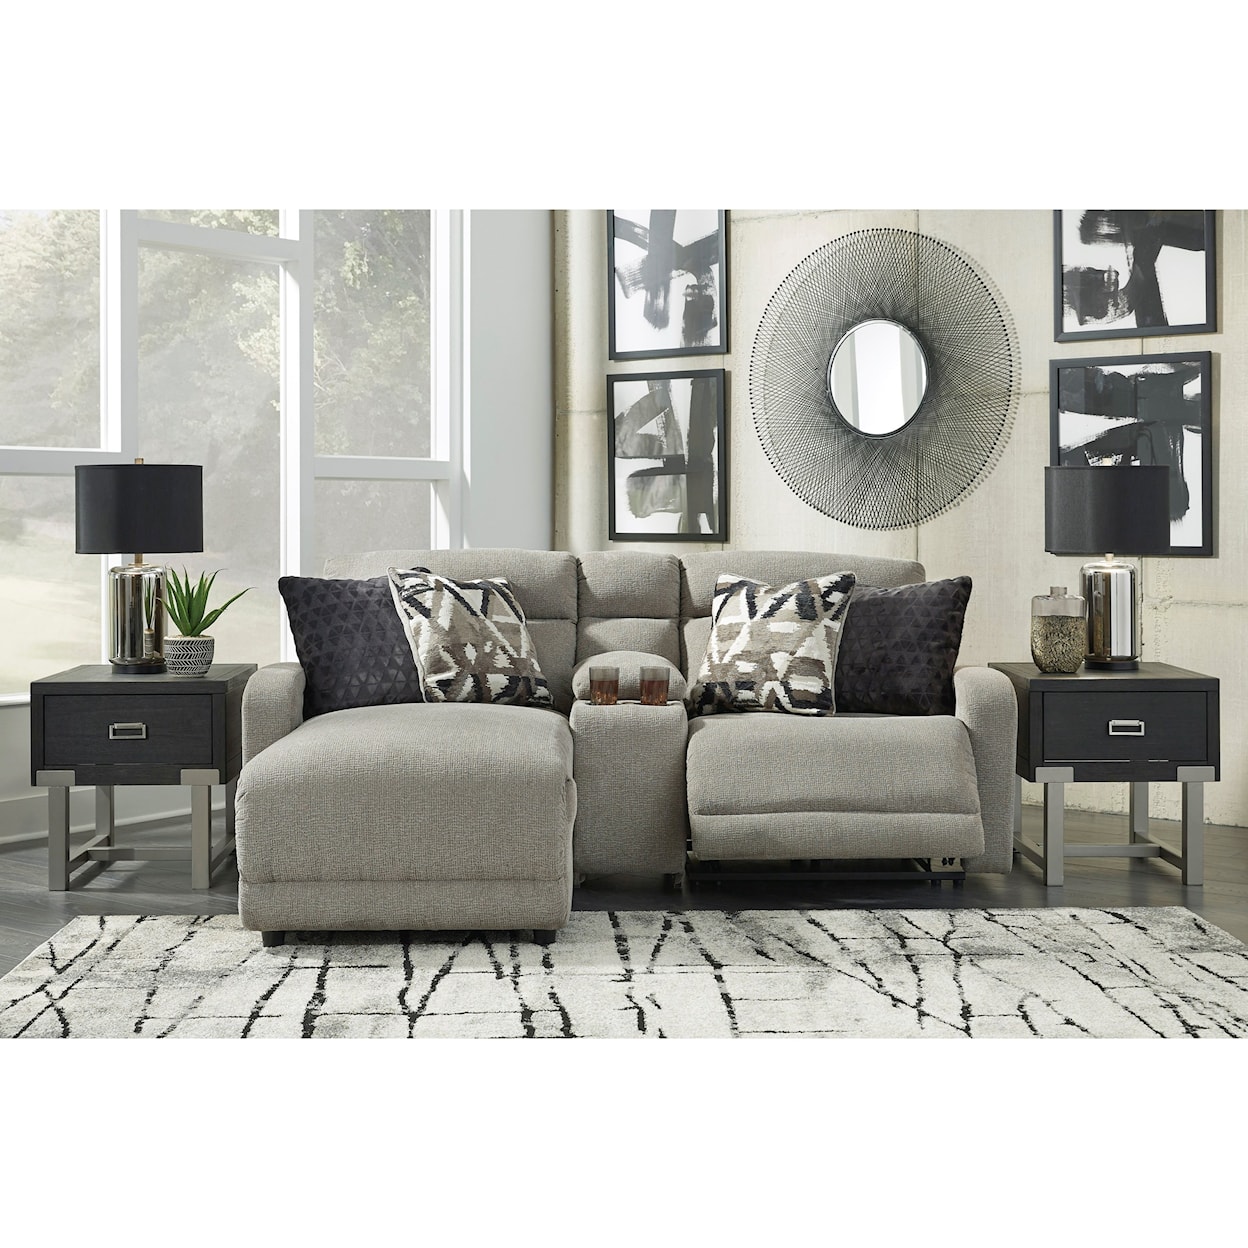 Signature Design by Ashley Furniture Colleyville 3-Piece Pwr Reclining Sectional with Chaise